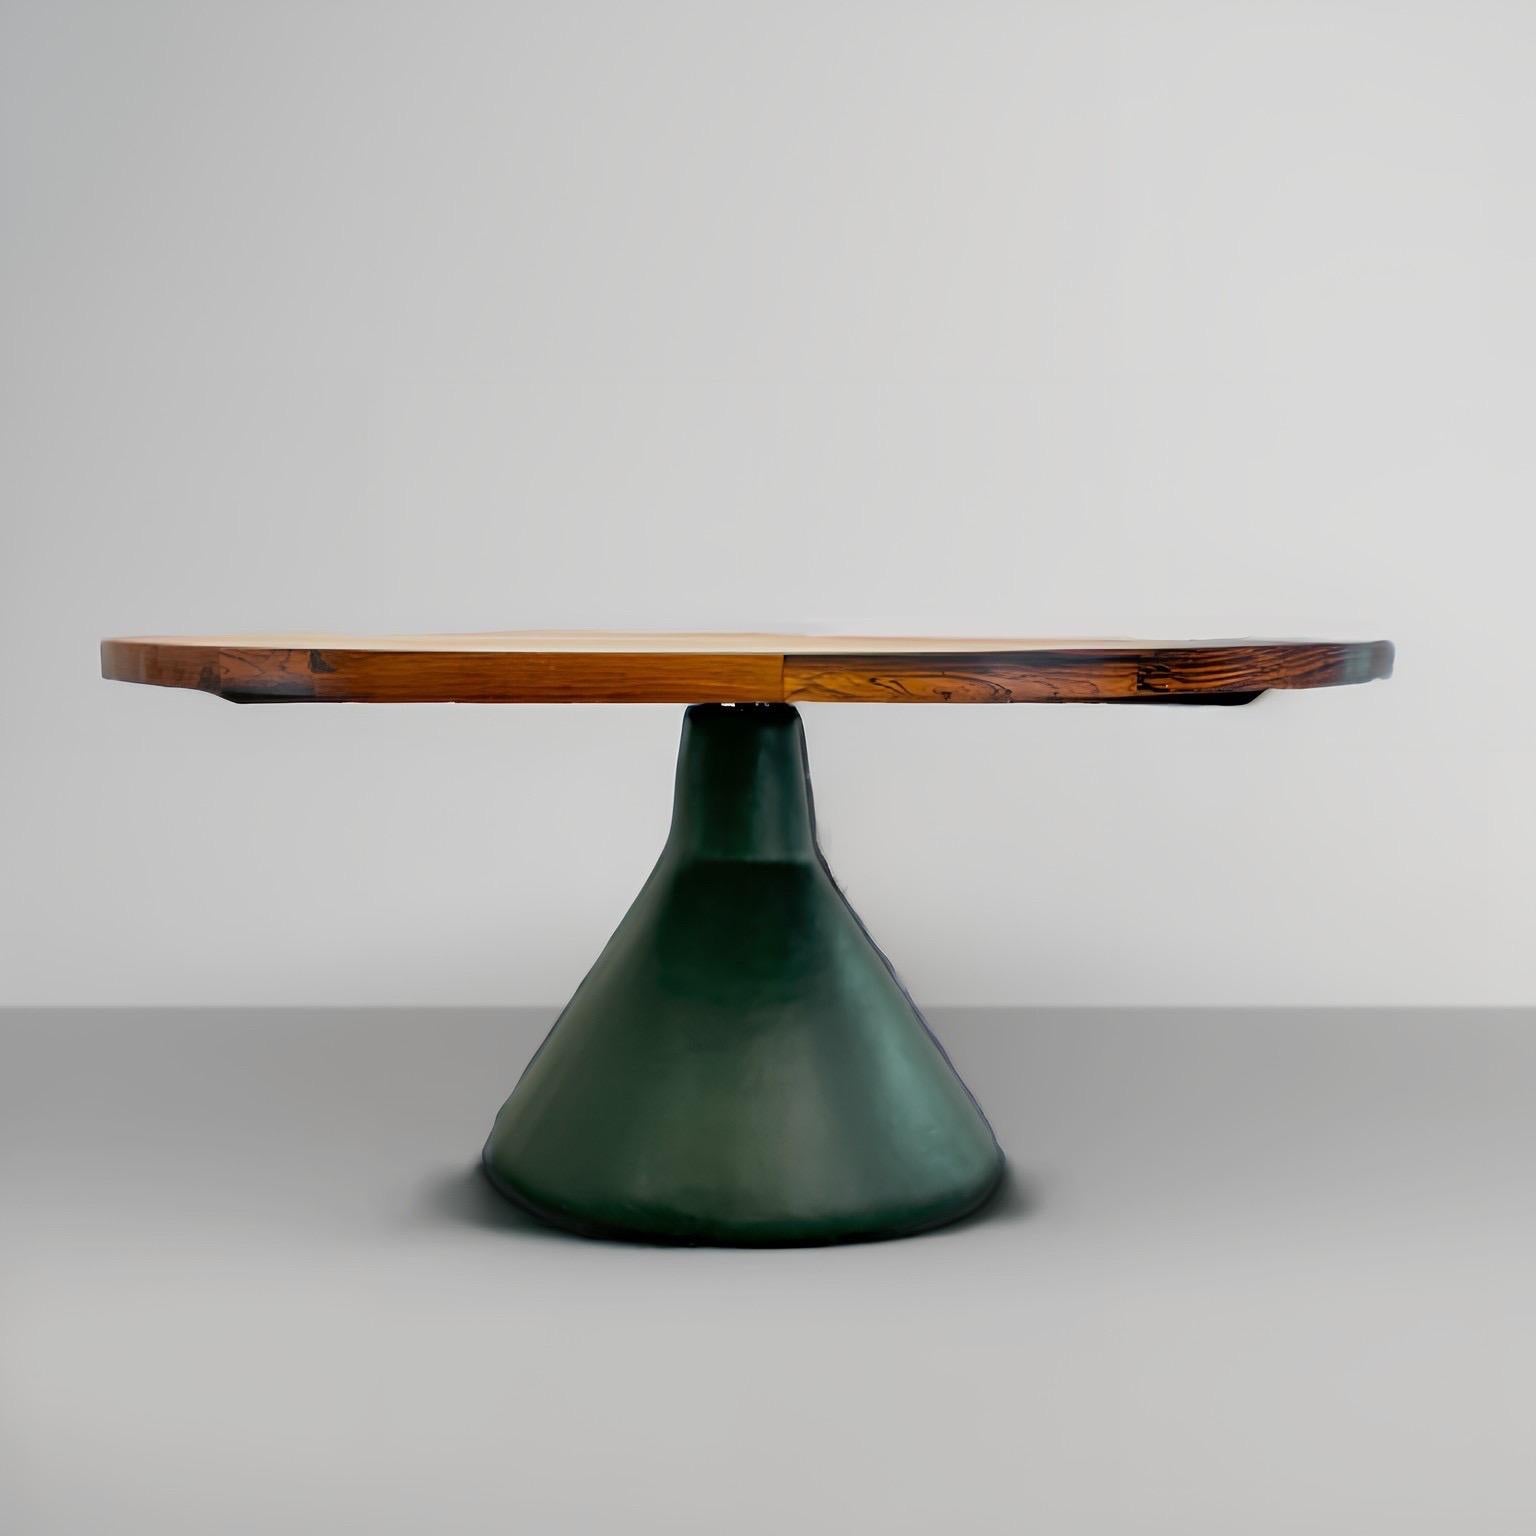 Brazilian Mid-Century Modern Round Wooden Leather Dining Table by Jorge Zalszupin, 1960s For Sale